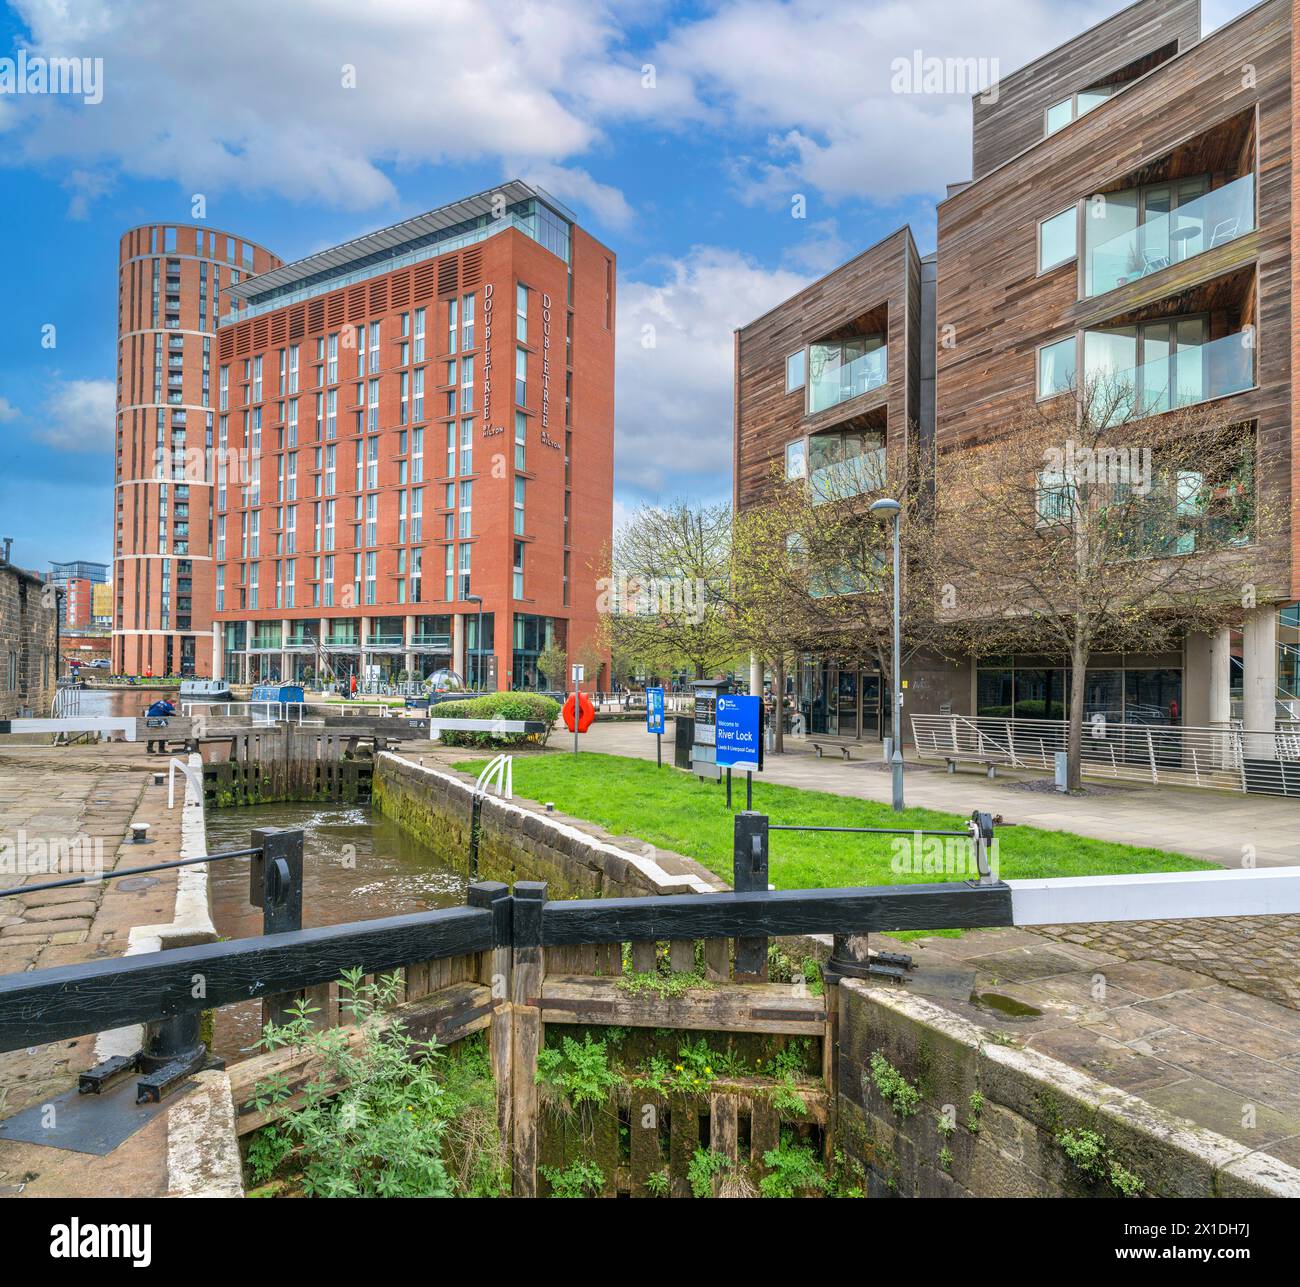 Granary Wharf looking towards the DoubleTree Hotel by Hilton, Leeds, West Yorkshire, UK Stock Photo